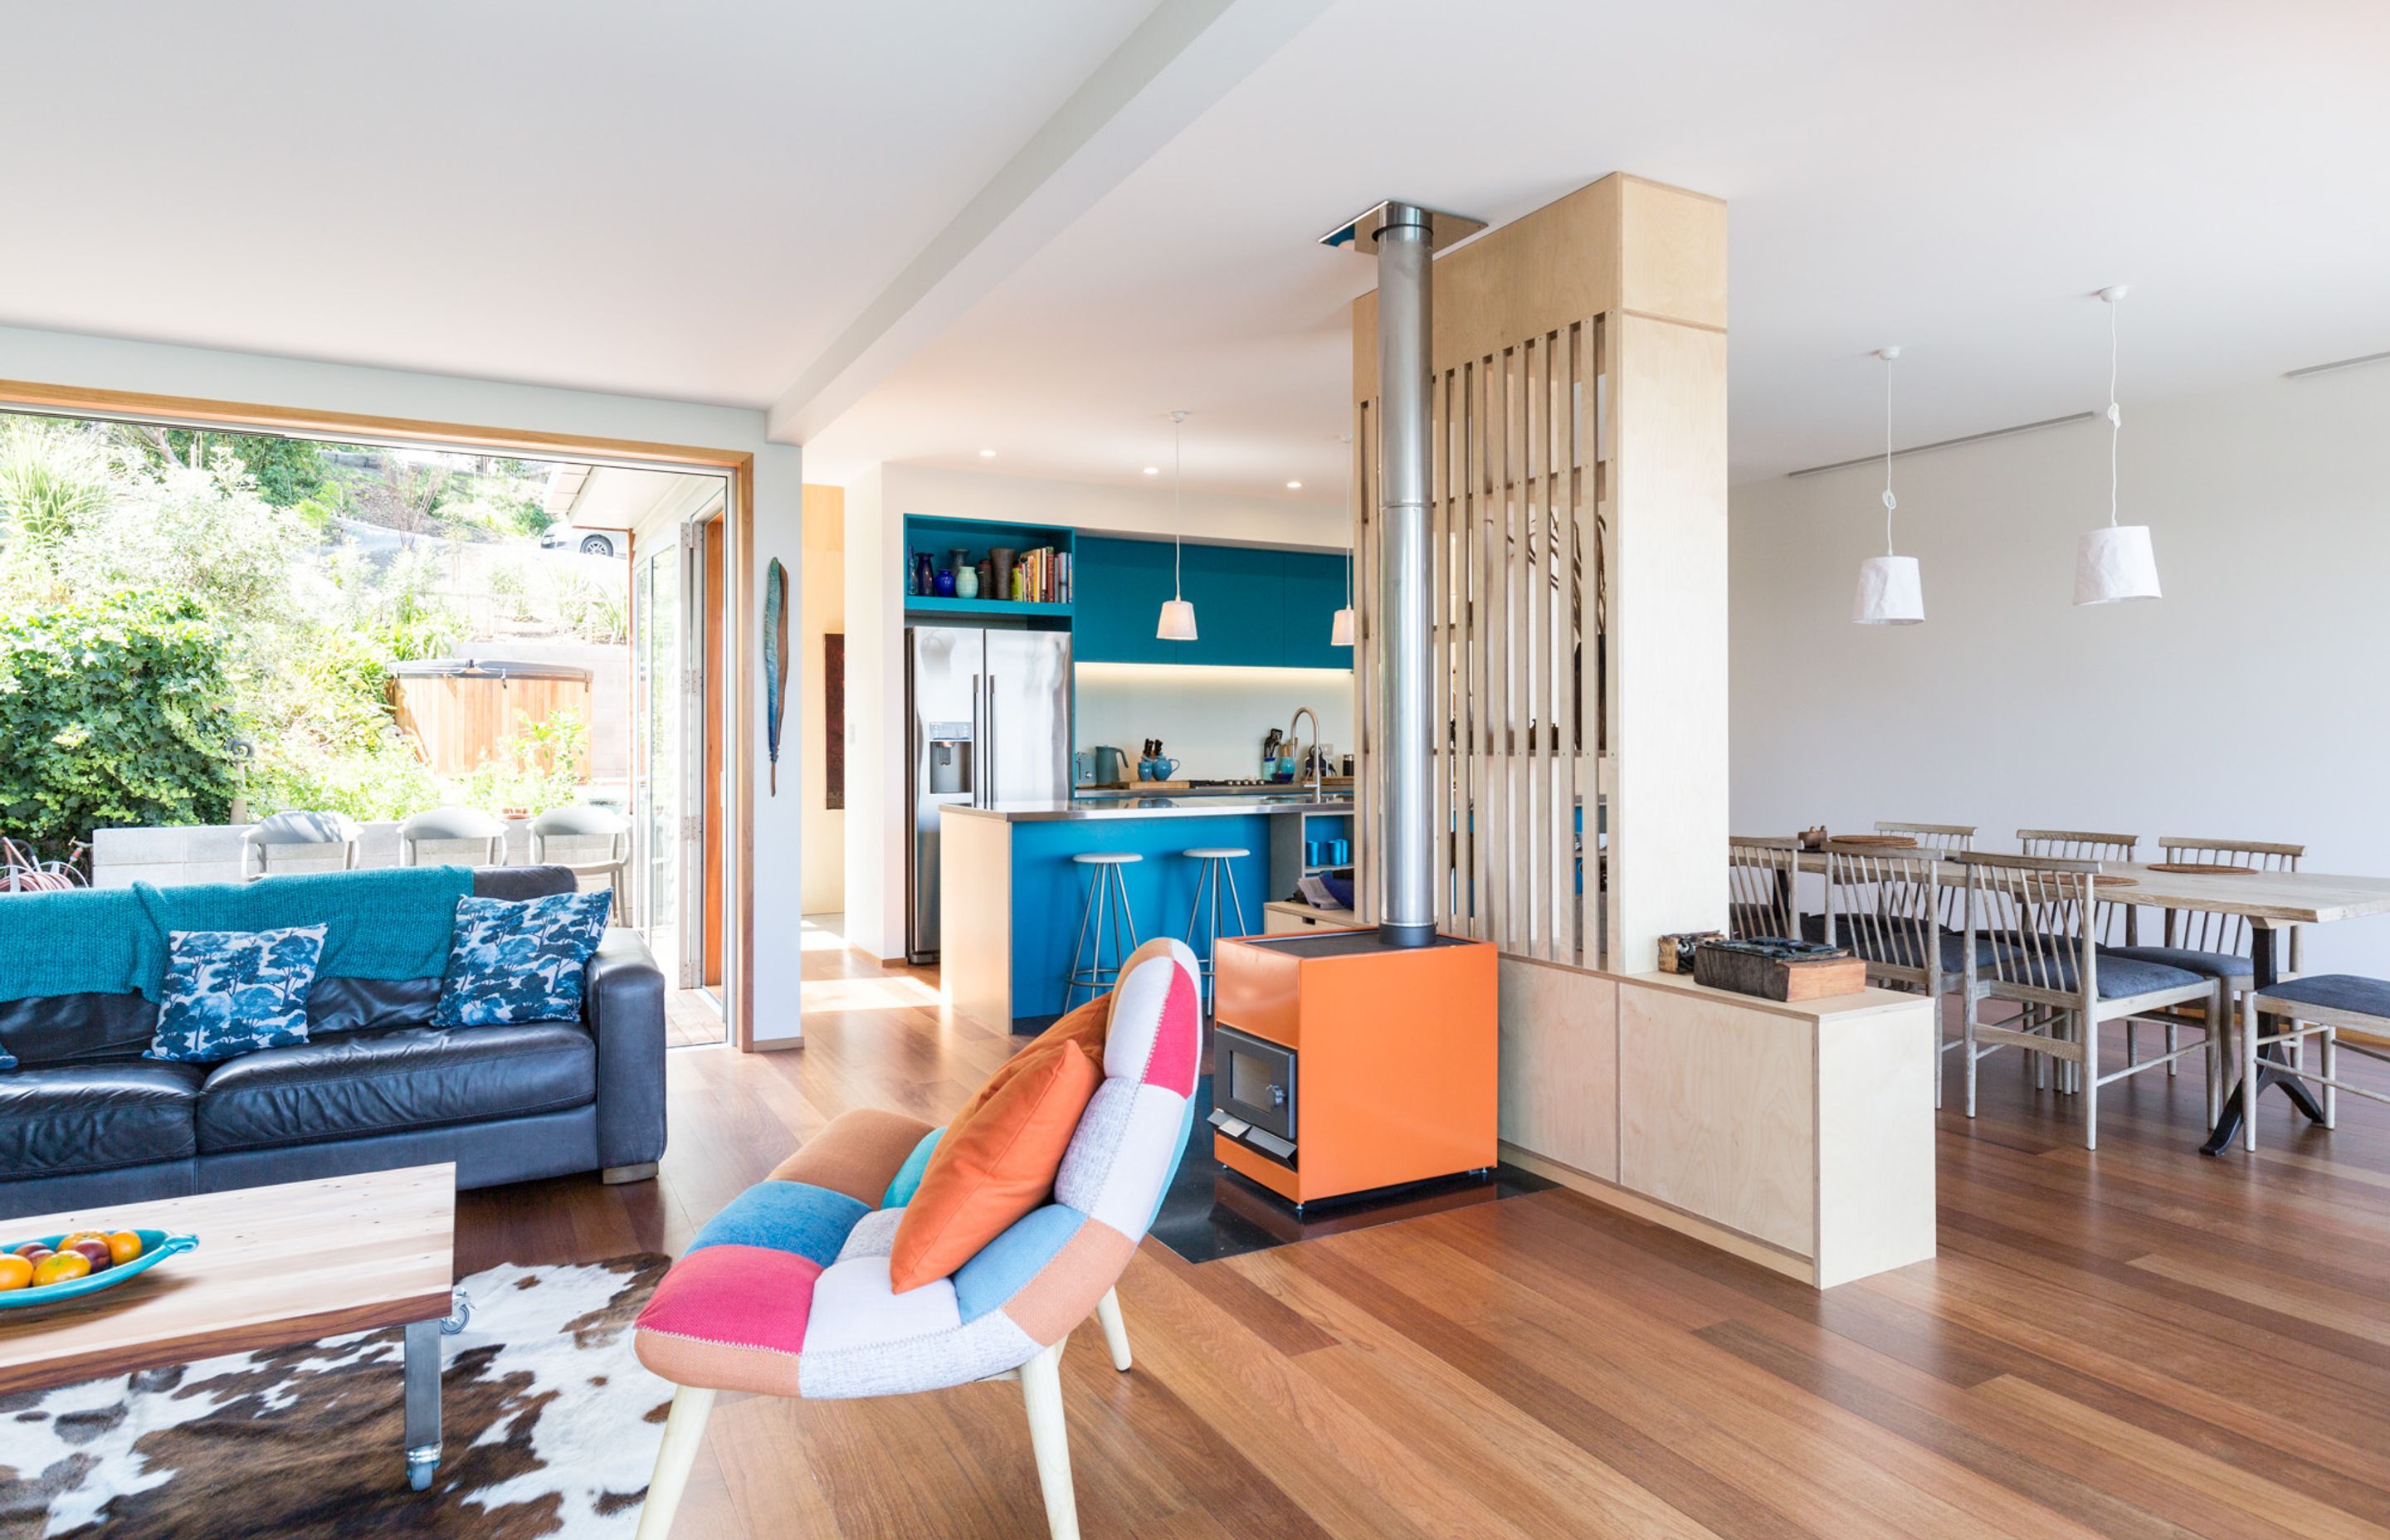 The cottage is now a bright and colourful open-plan living area.